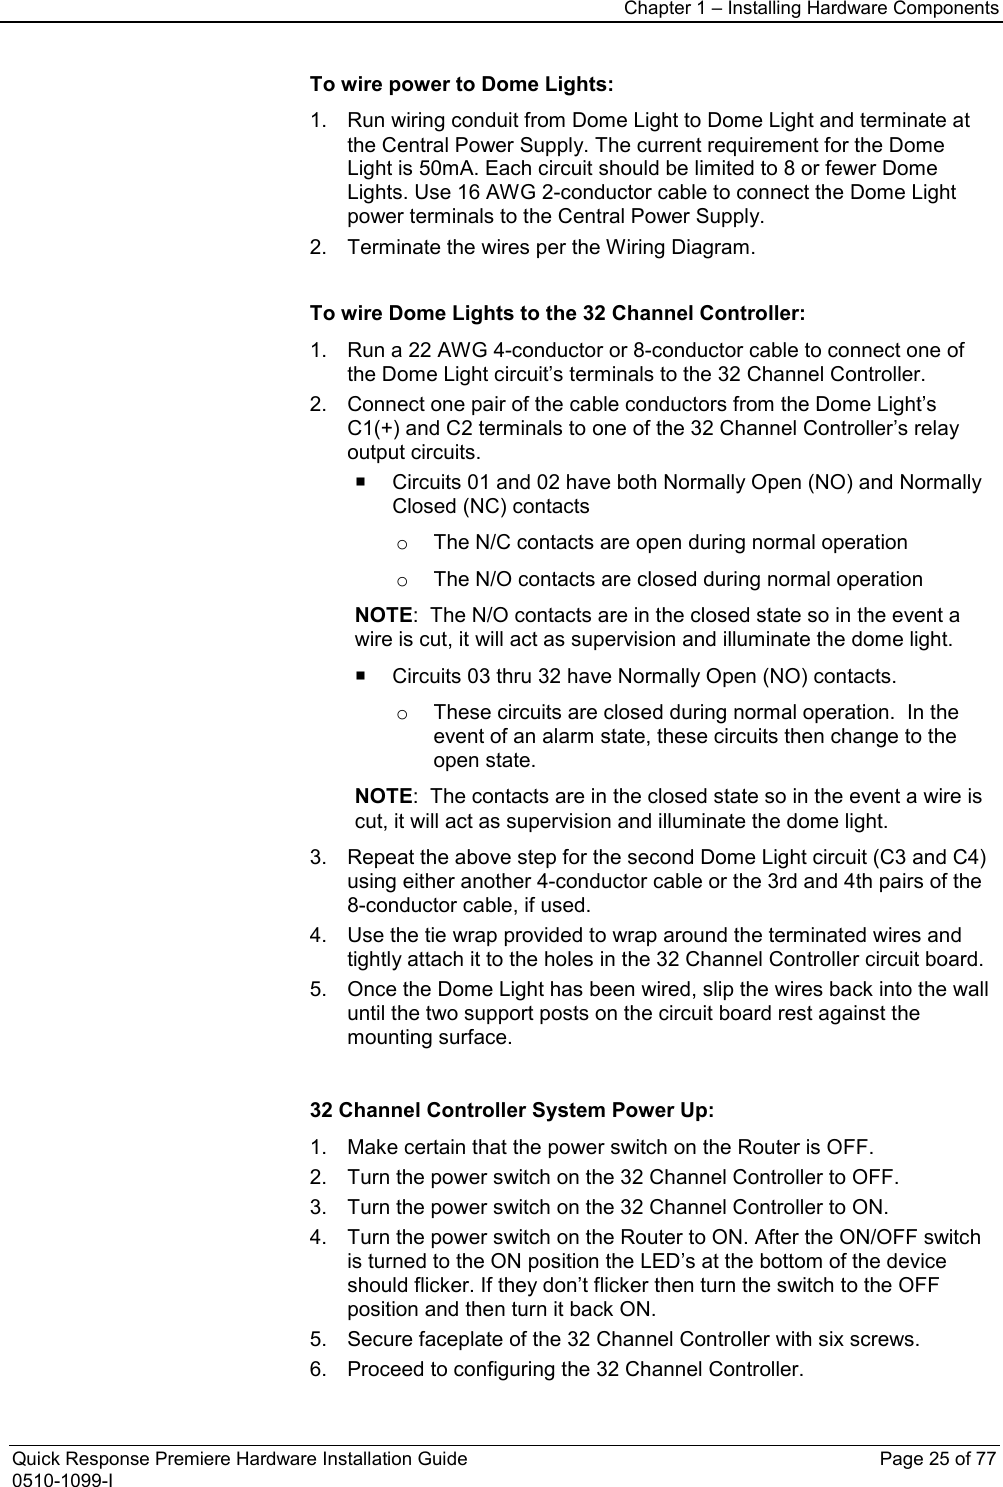 Chapter 1 – Installing Hardware Components  Quick Response Premiere Hardware Installation Guide    Page 25 of 77 0510-1099-I  To wire power to Dome Lights: 1. Run wiring conduit from Dome Light to Dome Light and terminate at the Central Power Supply. The current requirement for the Dome Light is 50mA. Each circuit should be limited to 8 or fewer Dome Lights. Use 16 AWG 2-conductor cable to connect the Dome Light power terminals to the Central Power Supply. 2. Terminate the wires per the Wiring Diagram.  To wire Dome Lights to the 32 Channel Controller: 1. Run a 22 AWG 4-conductor or 8-conductor cable to connect one of the Dome Light circuit’s terminals to the 32 Channel Controller. 2. Connect one pair of the cable conductors from the Dome Light’s C1(+) and C2 terminals to one of the 32 Channel Controller’s relay output circuits.    Circuits 01 and 02 have both Normally Open (NO) and Normally Closed (NC) contacts o The N/C contacts are open during normal operation o The N/O contacts are closed during normal operation NOTE:  The N/O contacts are in the closed state so in the event a wire is cut, it will act as supervision and illuminate the dome light.   Circuits 03 thru 32 have Normally Open (NO) contacts. o These circuits are closed during normal operation.  In the event of an alarm state, these circuits then change to the open state. NOTE:  The contacts are in the closed state so in the event a wire is cut, it will act as supervision and illuminate the dome light. 3. Repeat the above step for the second Dome Light circuit (C3 and C4) using either another 4-conductor cable or the 3rd and 4th pairs of the 8-conductor cable, if used. 4. Use the tie wrap provided to wrap around the terminated wires and tightly attach it to the holes in the 32 Channel Controller circuit board. 5. Once the Dome Light has been wired, slip the wires back into the wall until the two support posts on the circuit board rest against the mounting surface.   32 Channel Controller System Power Up: 1. Make certain that the power switch on the Router is OFF. 2. Turn the power switch on the 32 Channel Controller to OFF. 3. Turn the power switch on the 32 Channel Controller to ON. 4. Turn the power switch on the Router to ON. After the ON/OFF switch is turned to the ON position the LED’s at the bottom of the device should flicker. If they don’t flicker then turn the switch to the OFF position and then turn it back ON. 5. Secure faceplate of the 32 Channel Controller with six screws. 6. Proceed to configuring the 32 Channel Controller. 